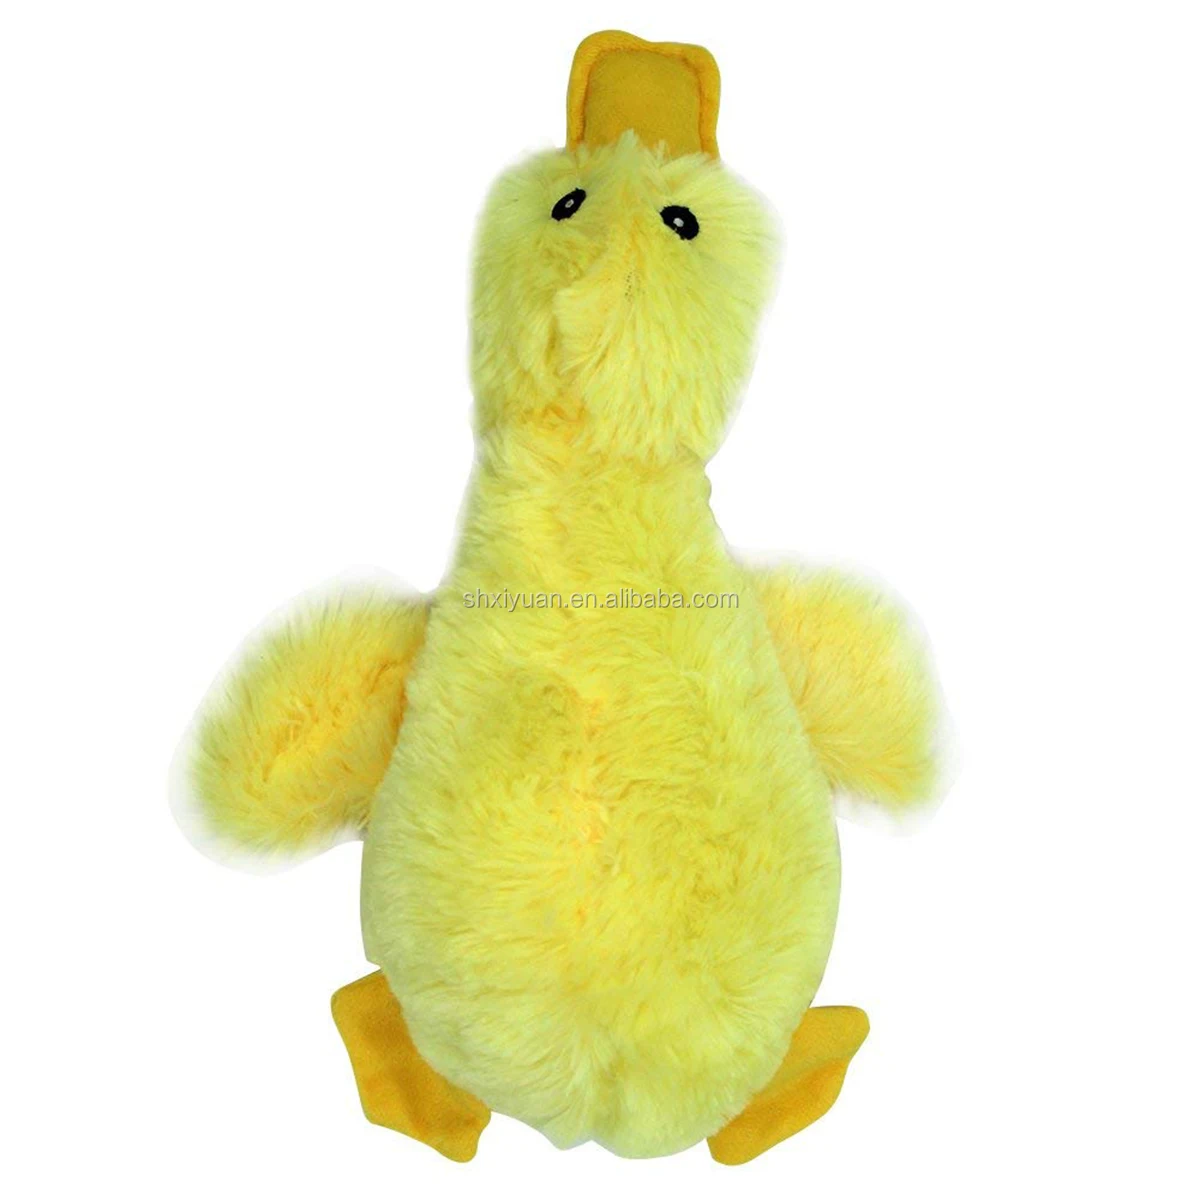 squeaky duck toy